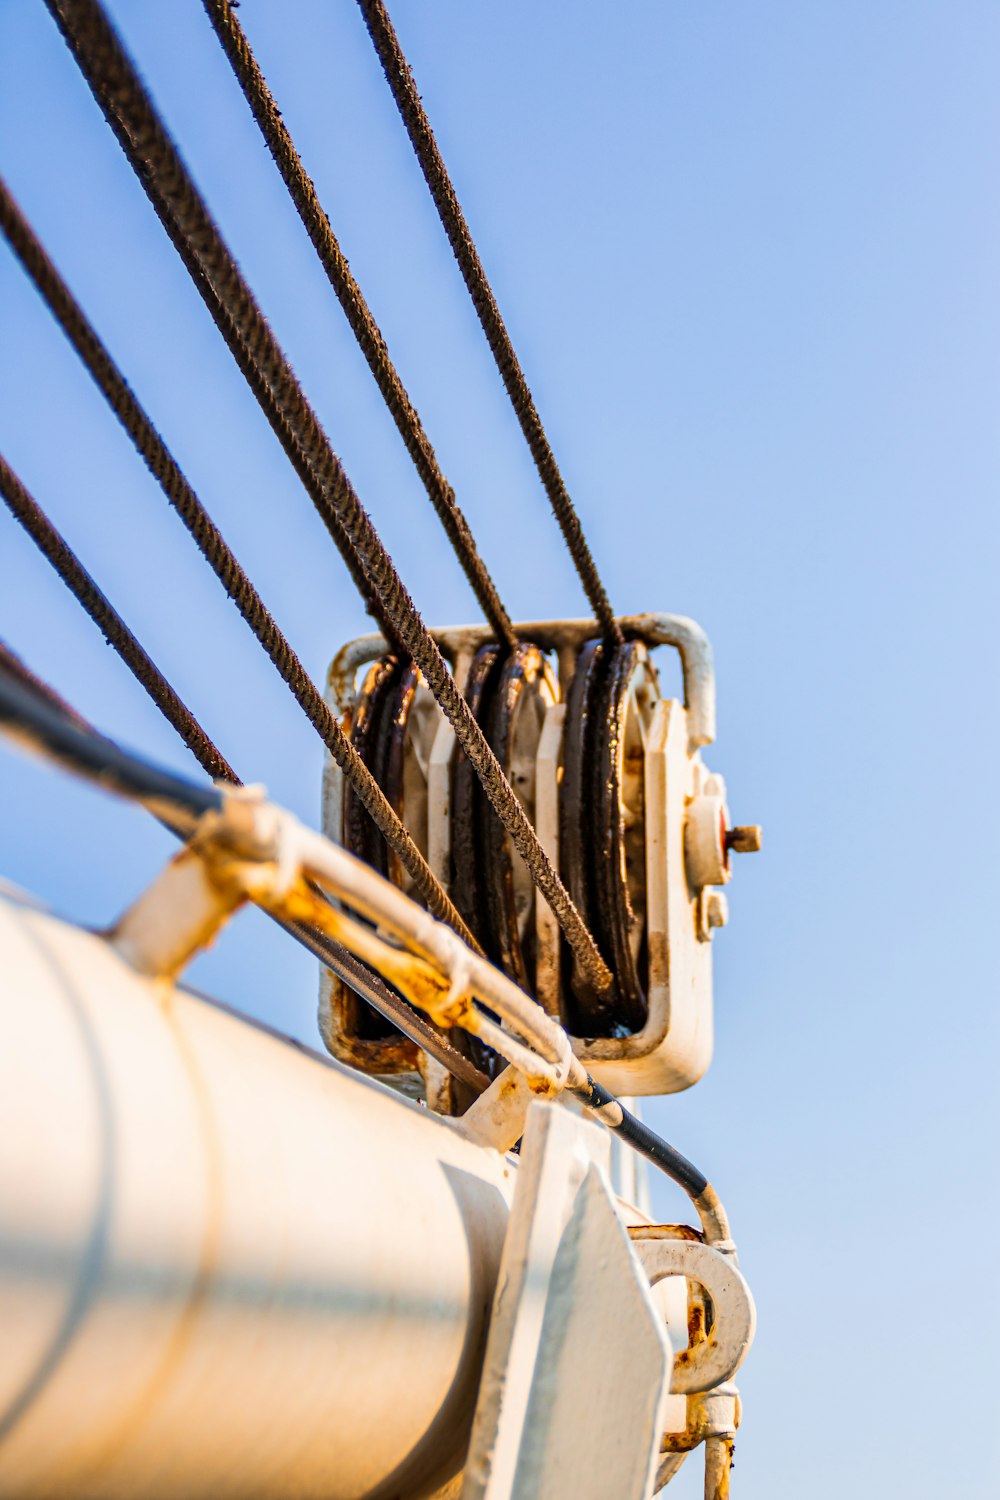 a close up of the top of a boat's mast